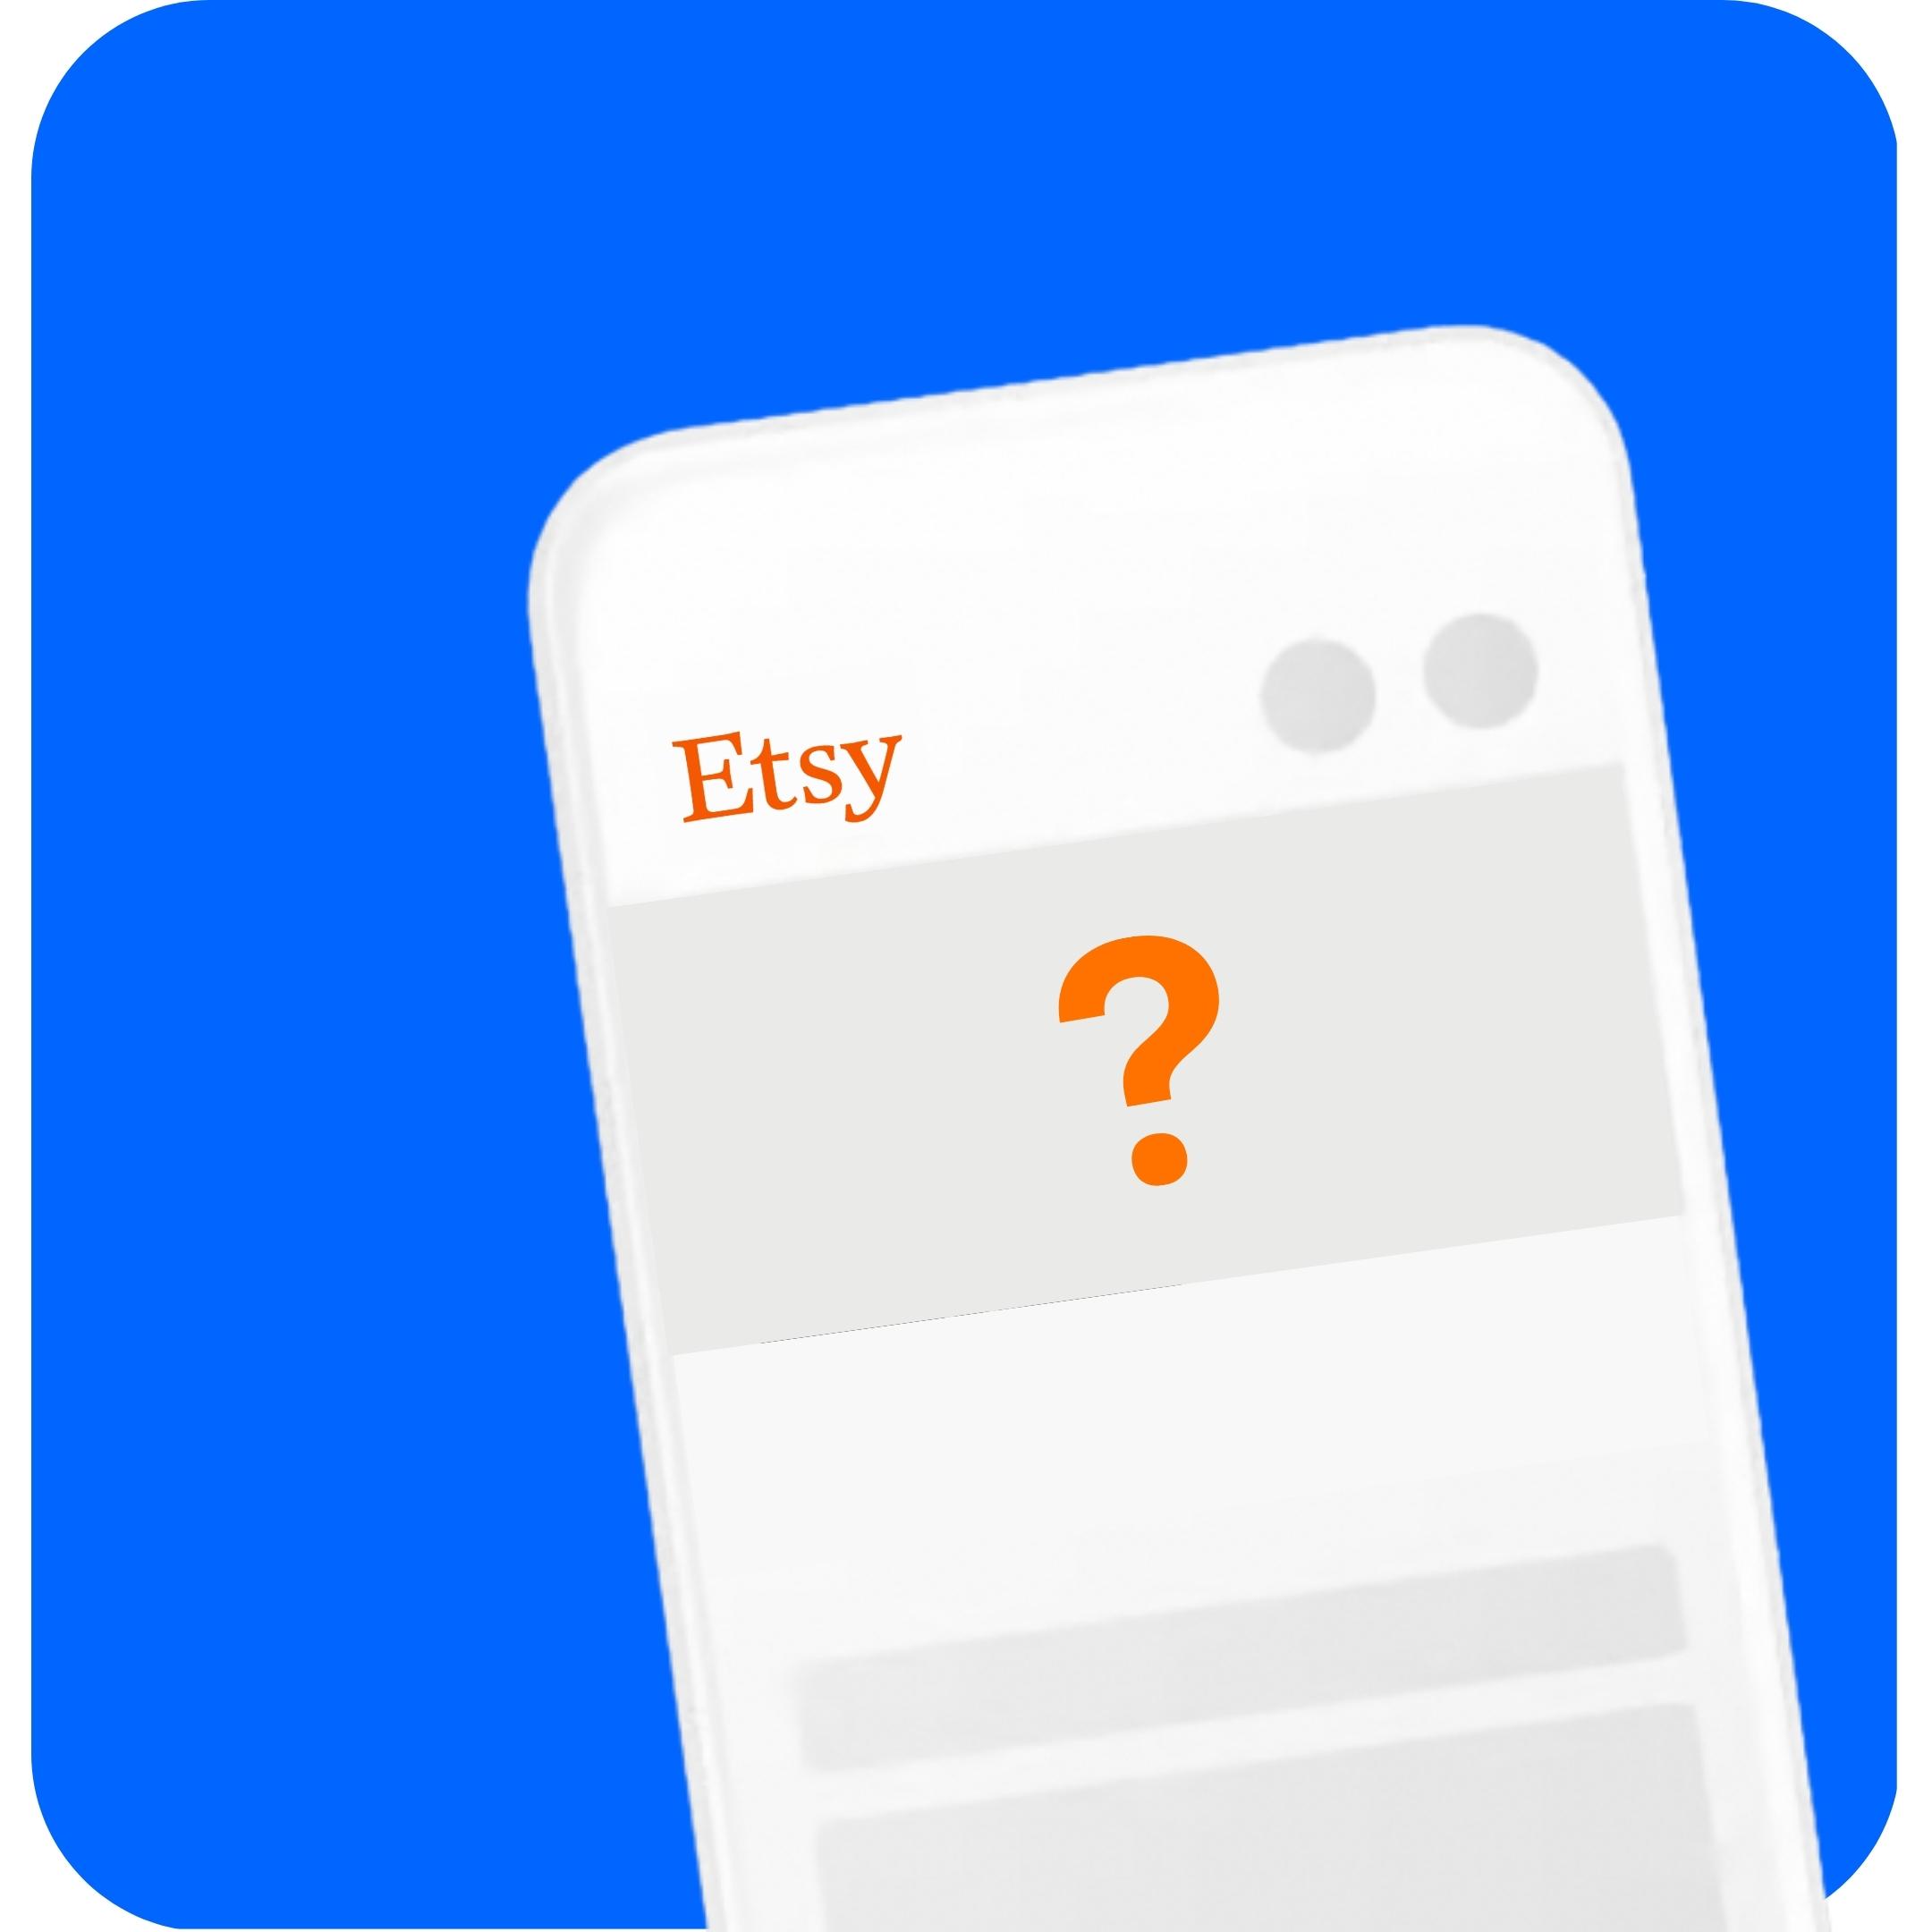 Does Etsy Collect Sales Tax?